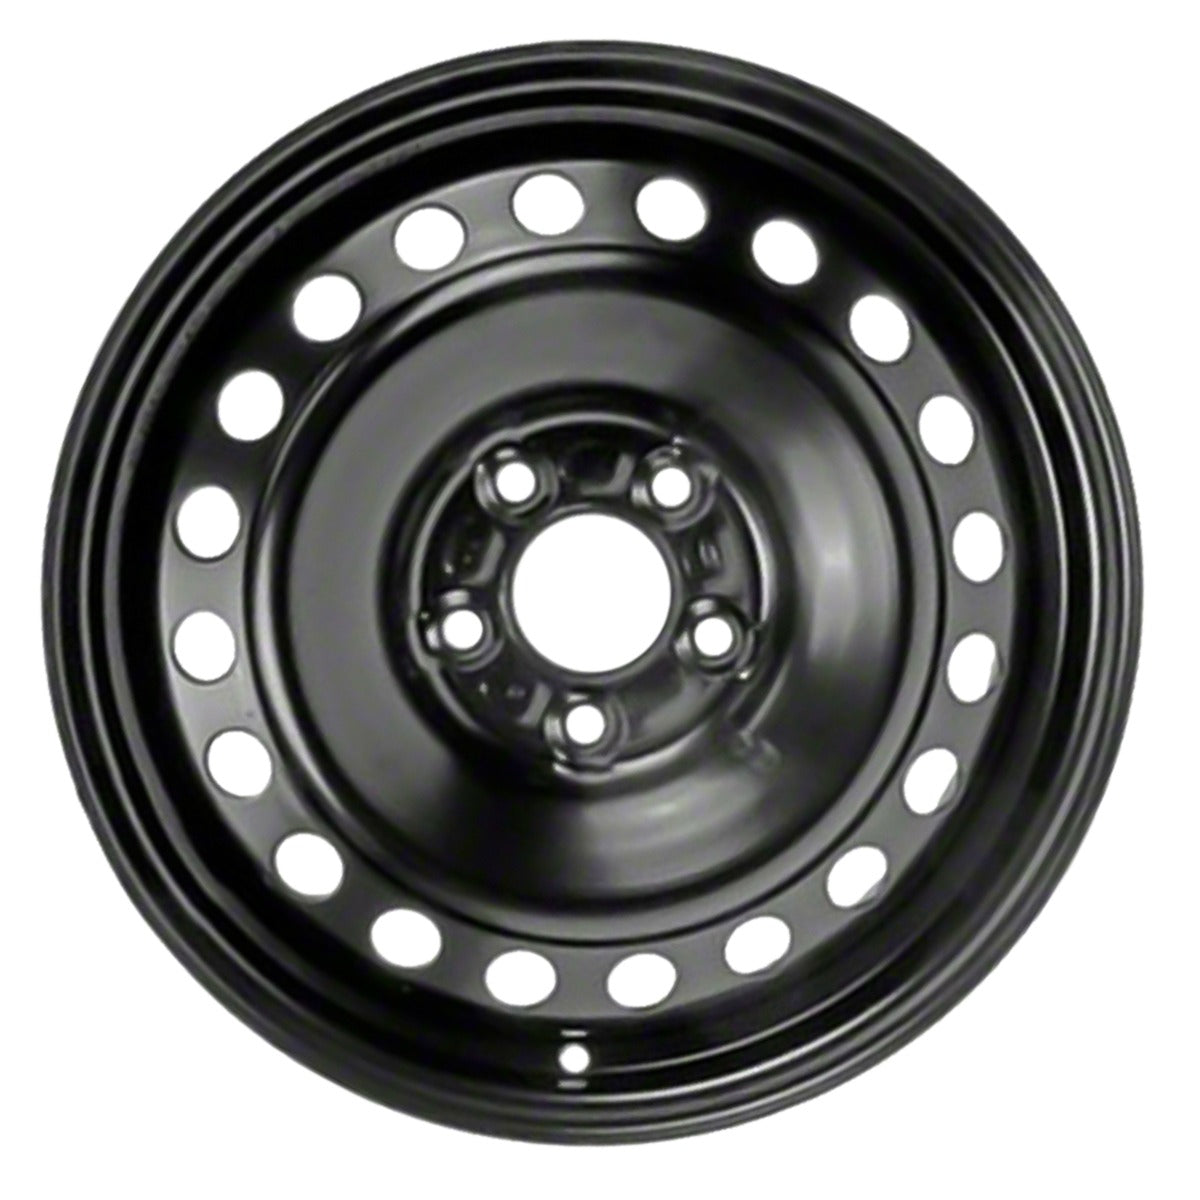 2020 Ford Fusion New 16" Replacement Rim RW3956B